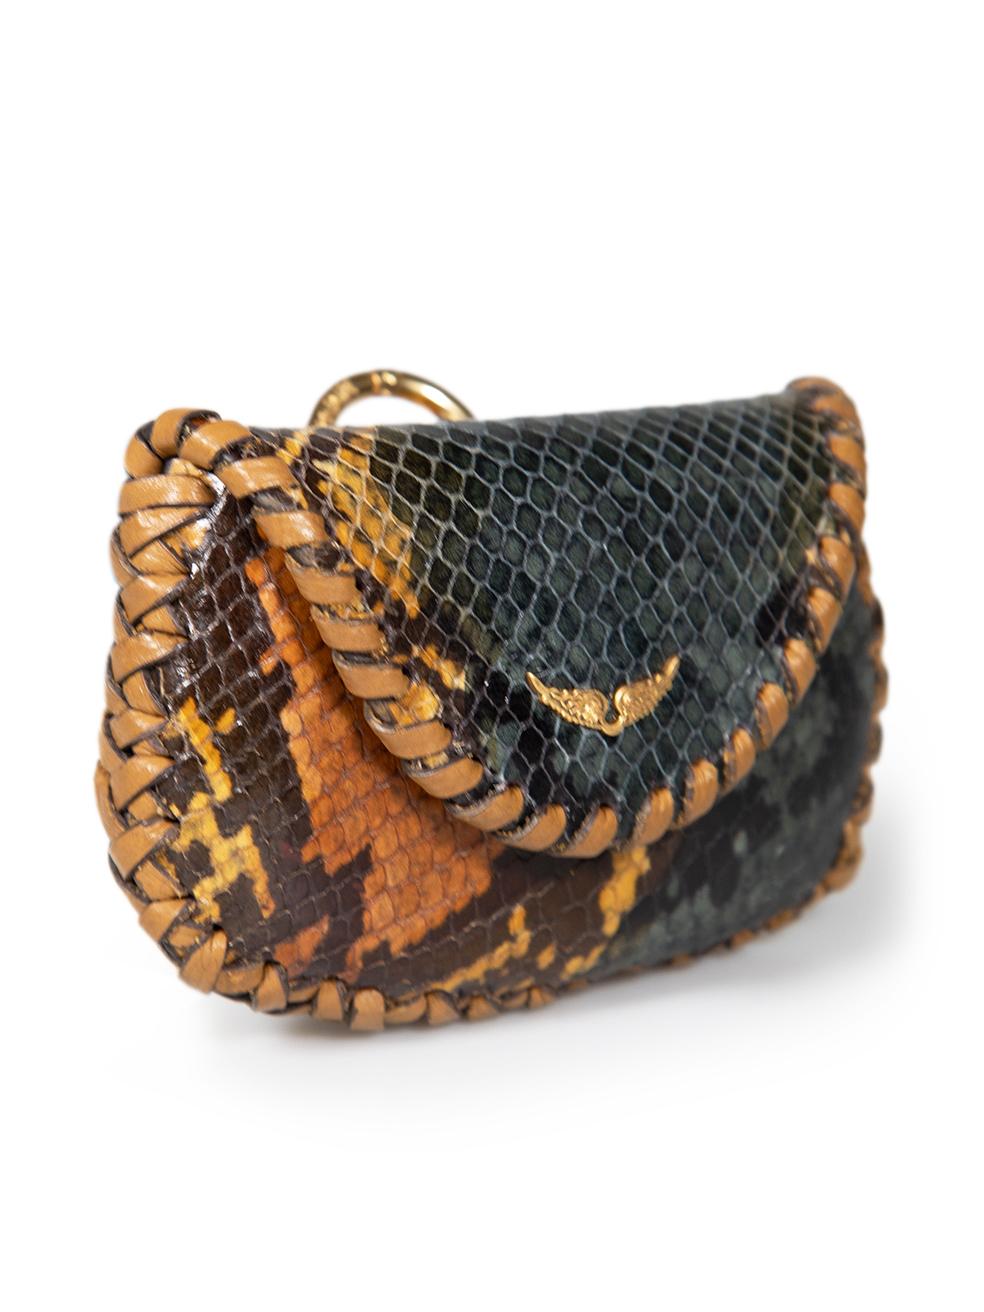 CONDITION is Very good. Hardly any visible wear to coin purse is evident on this used Zadig & Voltaire designer resale item. This item comes with original dust bag.
 
 
 
 Details
 
 
 Multicolour- black, brown
 
 Snakeskin
 
 Coin purse
 
 Flap